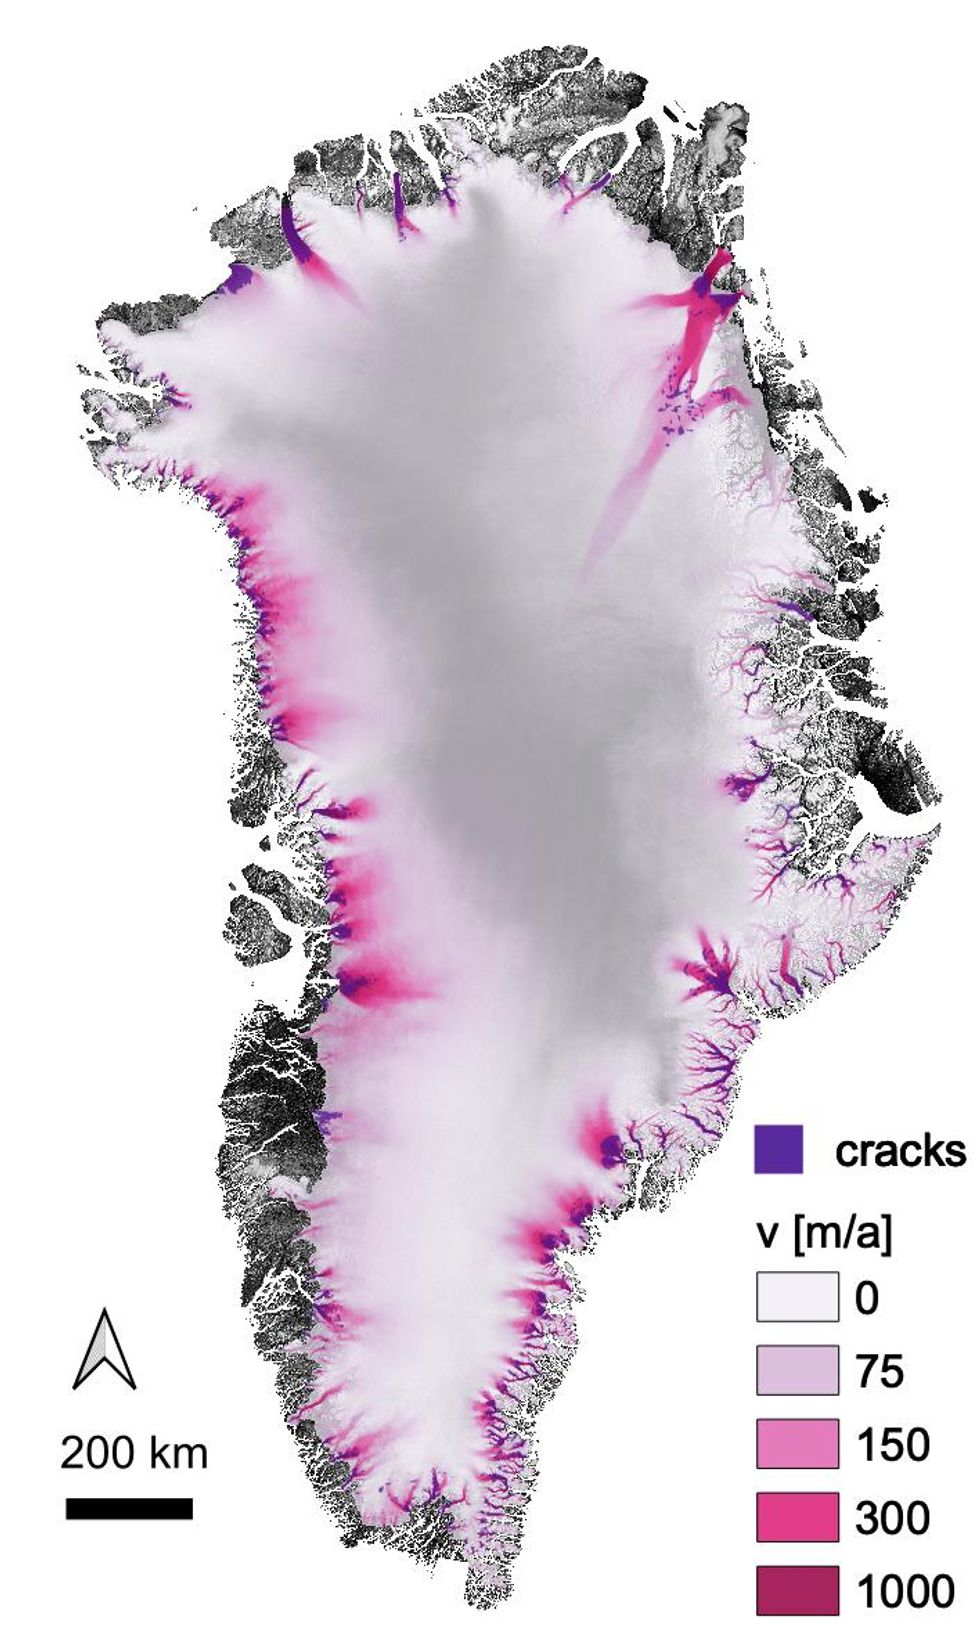 Map of Greenland showing location of cracks and ice flow near the coast.